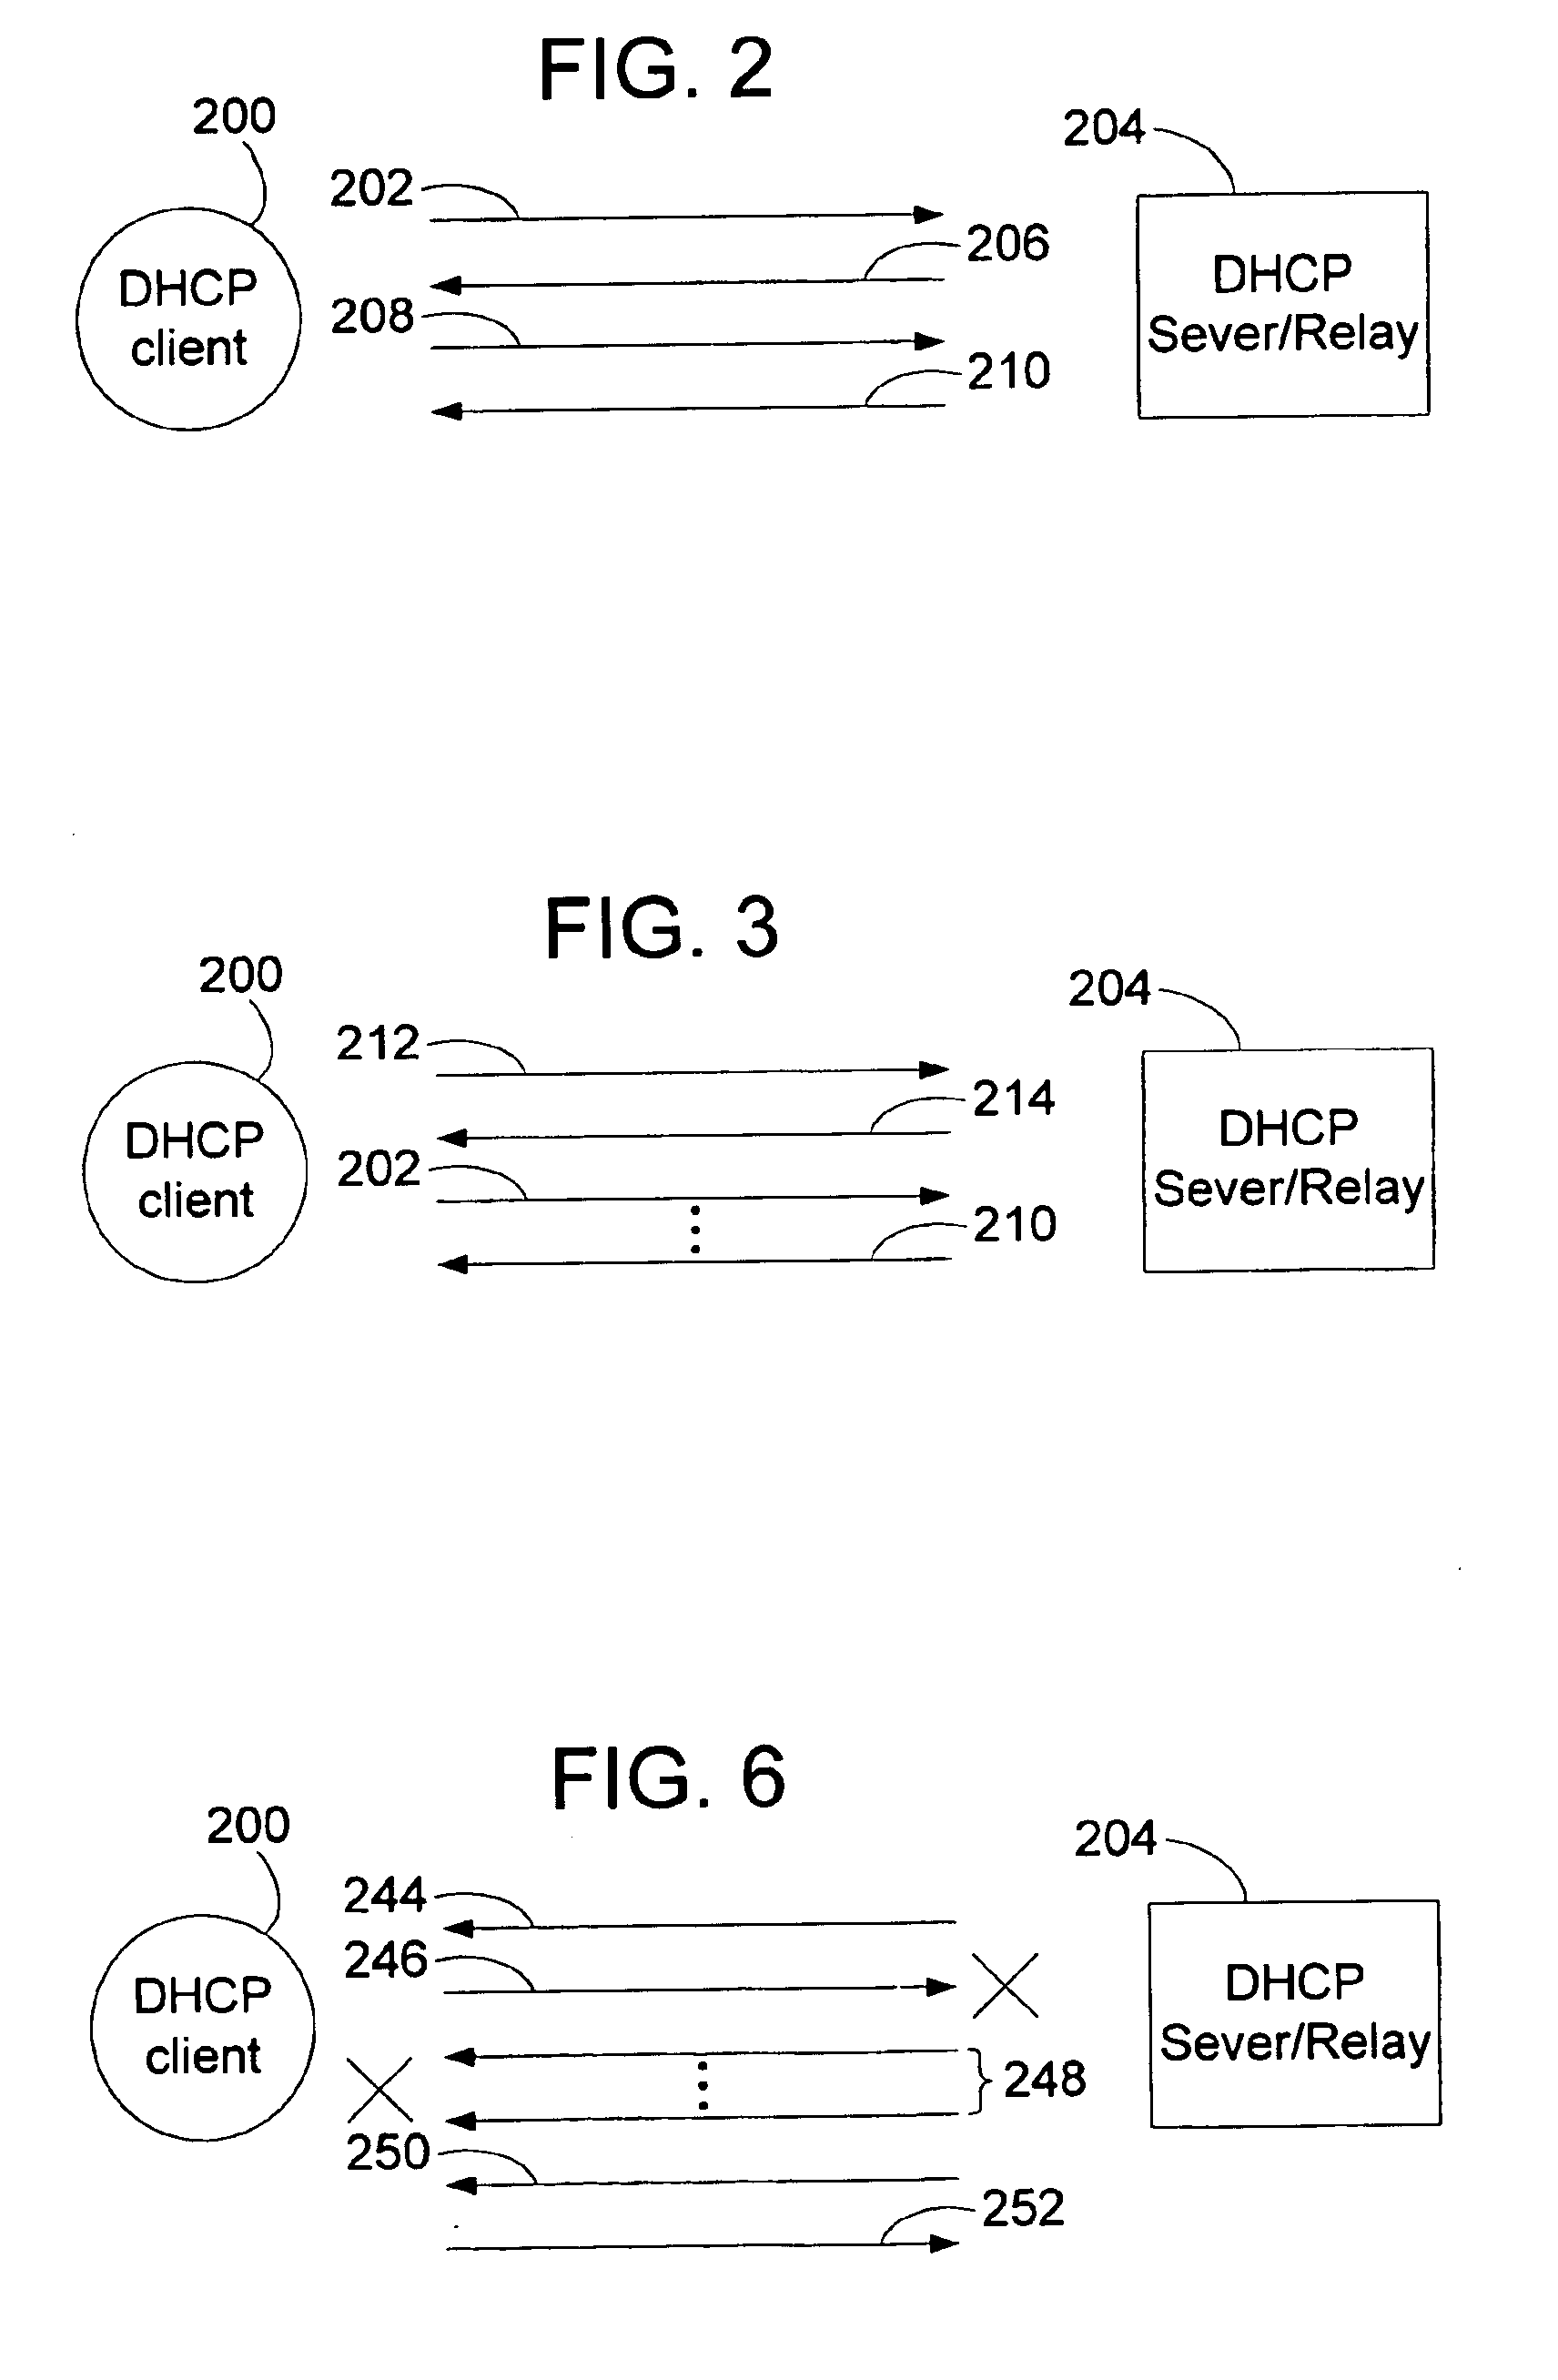 System and method of assigning and reclaiming static addresses through the dynamic host configuration protocol